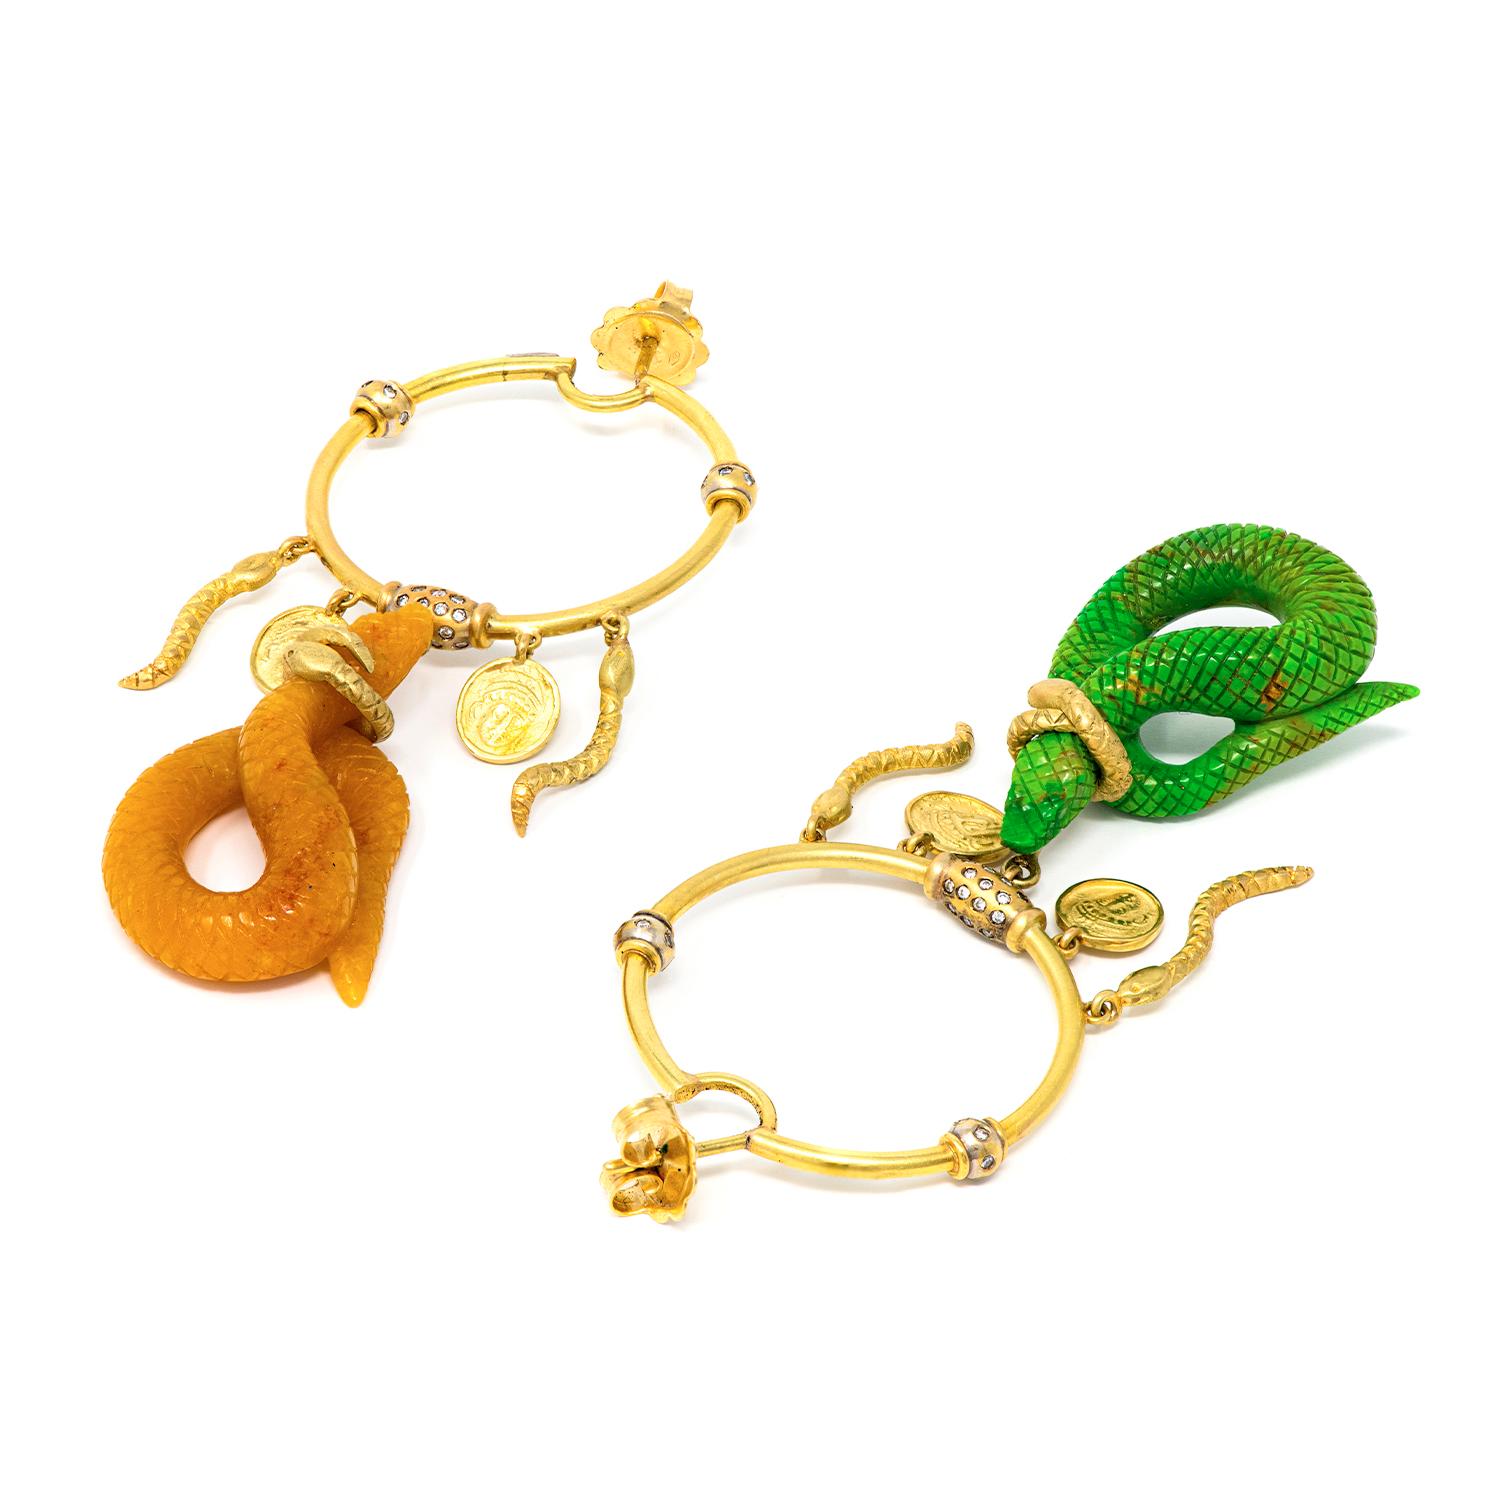 21st Century Diamond Serpent Snakes Green Turquoise Jade Coin Gold Hoop Earrings

Earrings in 18 Karat Yellow Gold, Diamonds and 2 serpents carved in Green Turquoise and Honey Jade.

Introducing our exquisite earrings from The Guardians of the